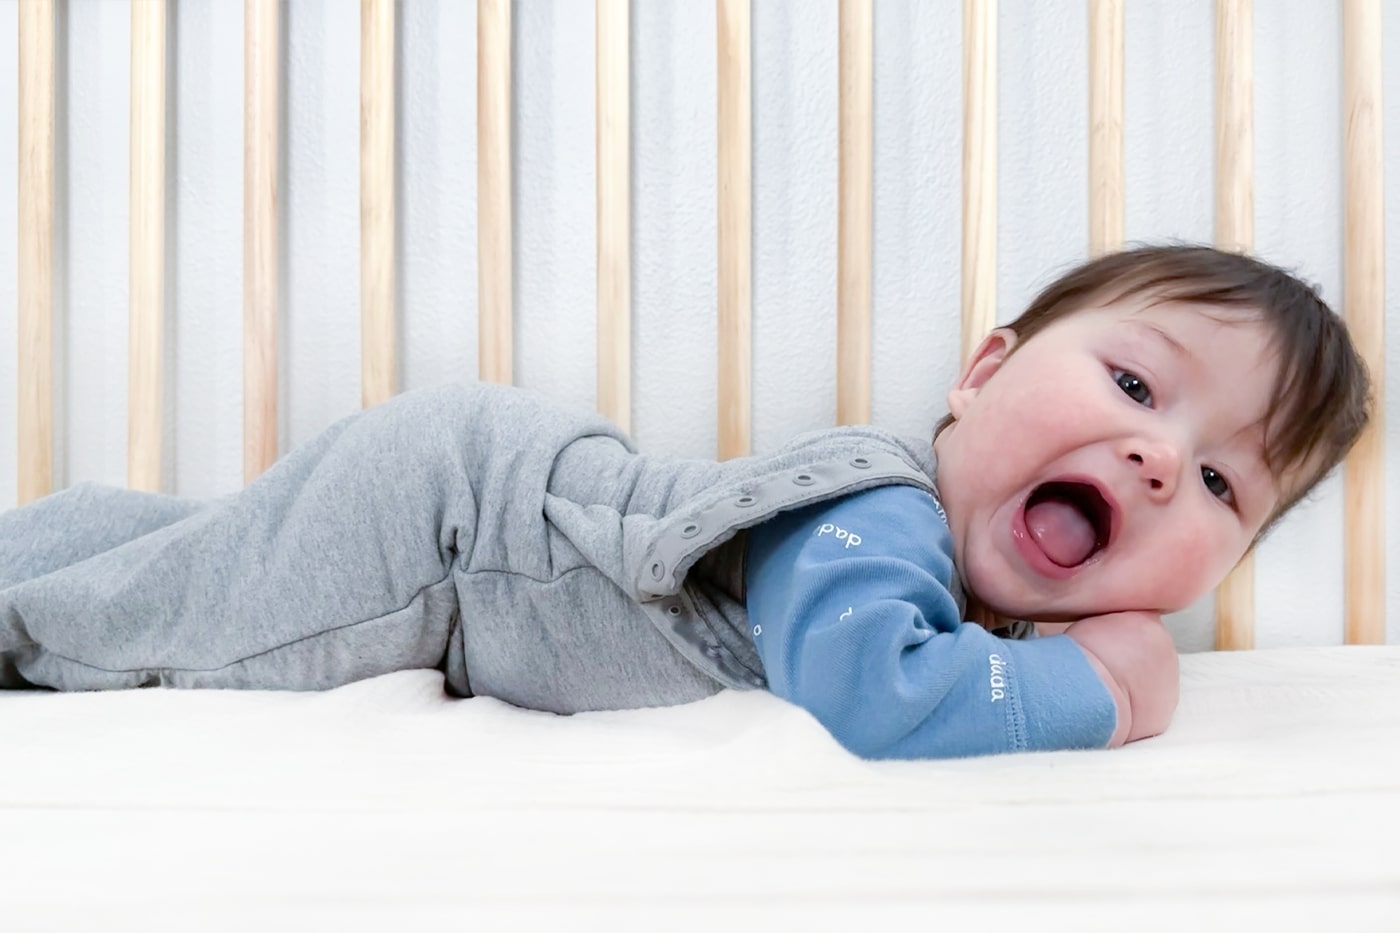 Is Your Baby Too Hot or Too Cold While Sleeping? Here's How to Know…